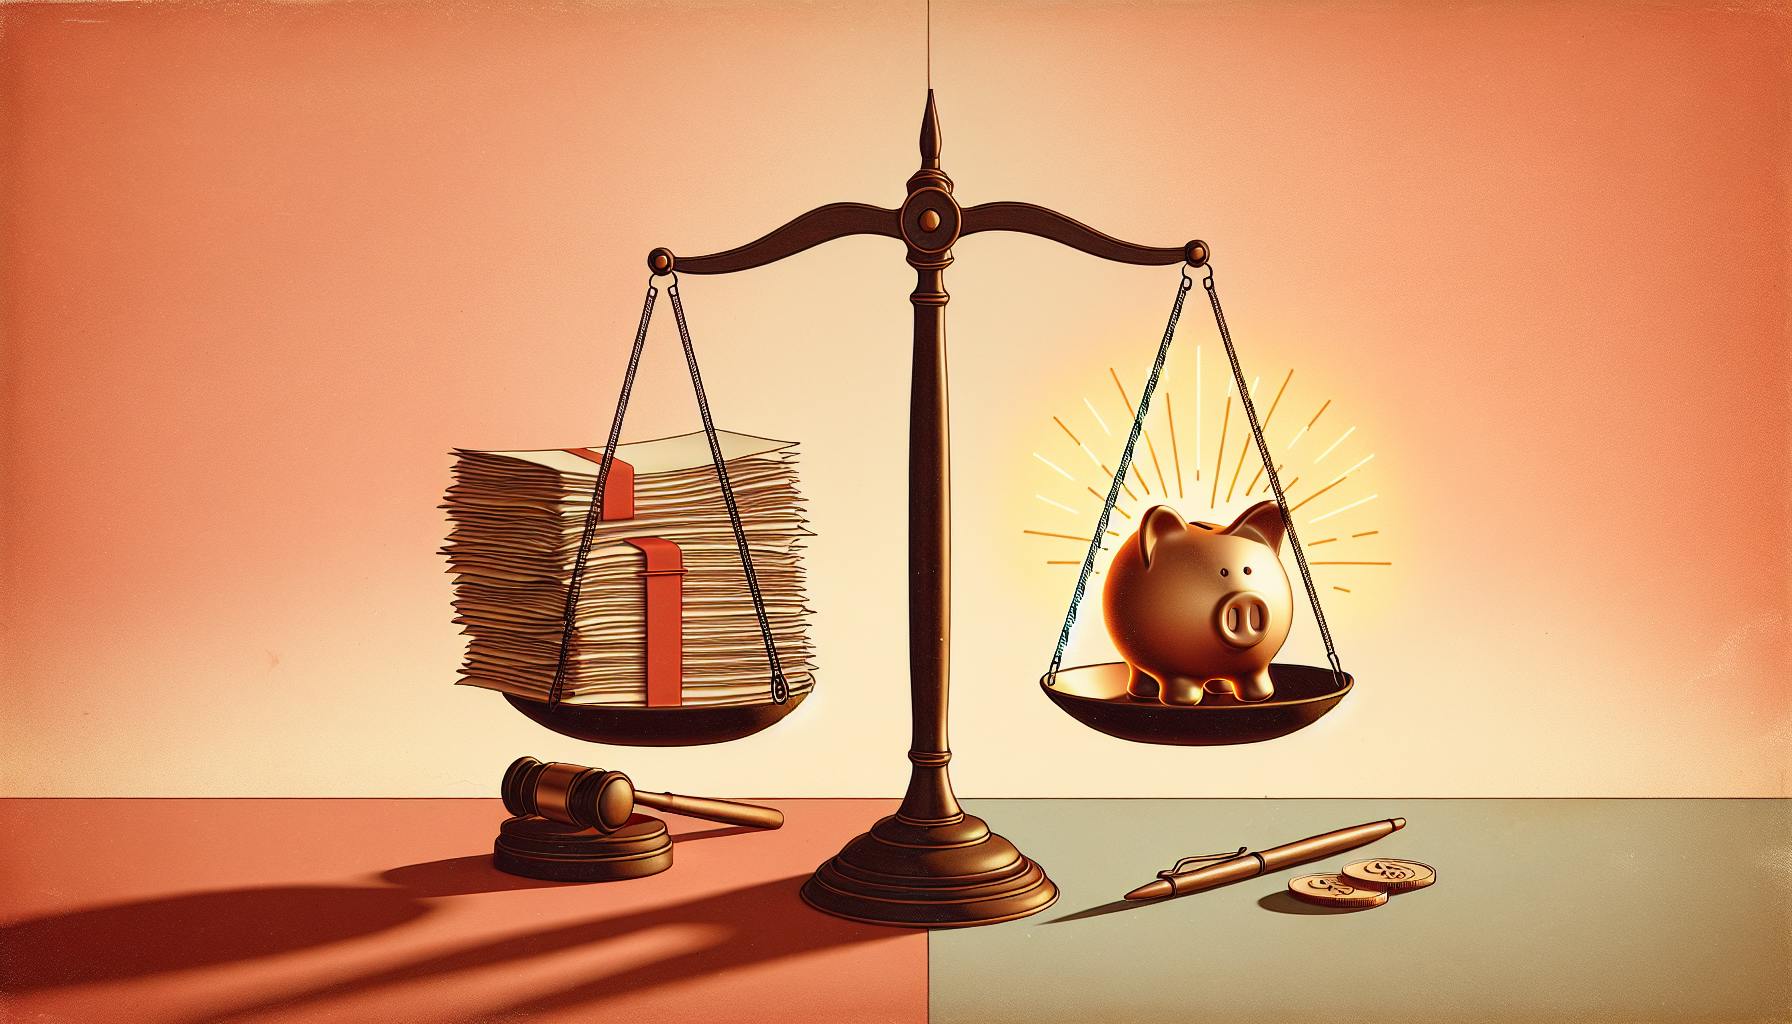 Civil Rights Paralegal Salary in the US: Financial Reflections in Social Justice Legal Work